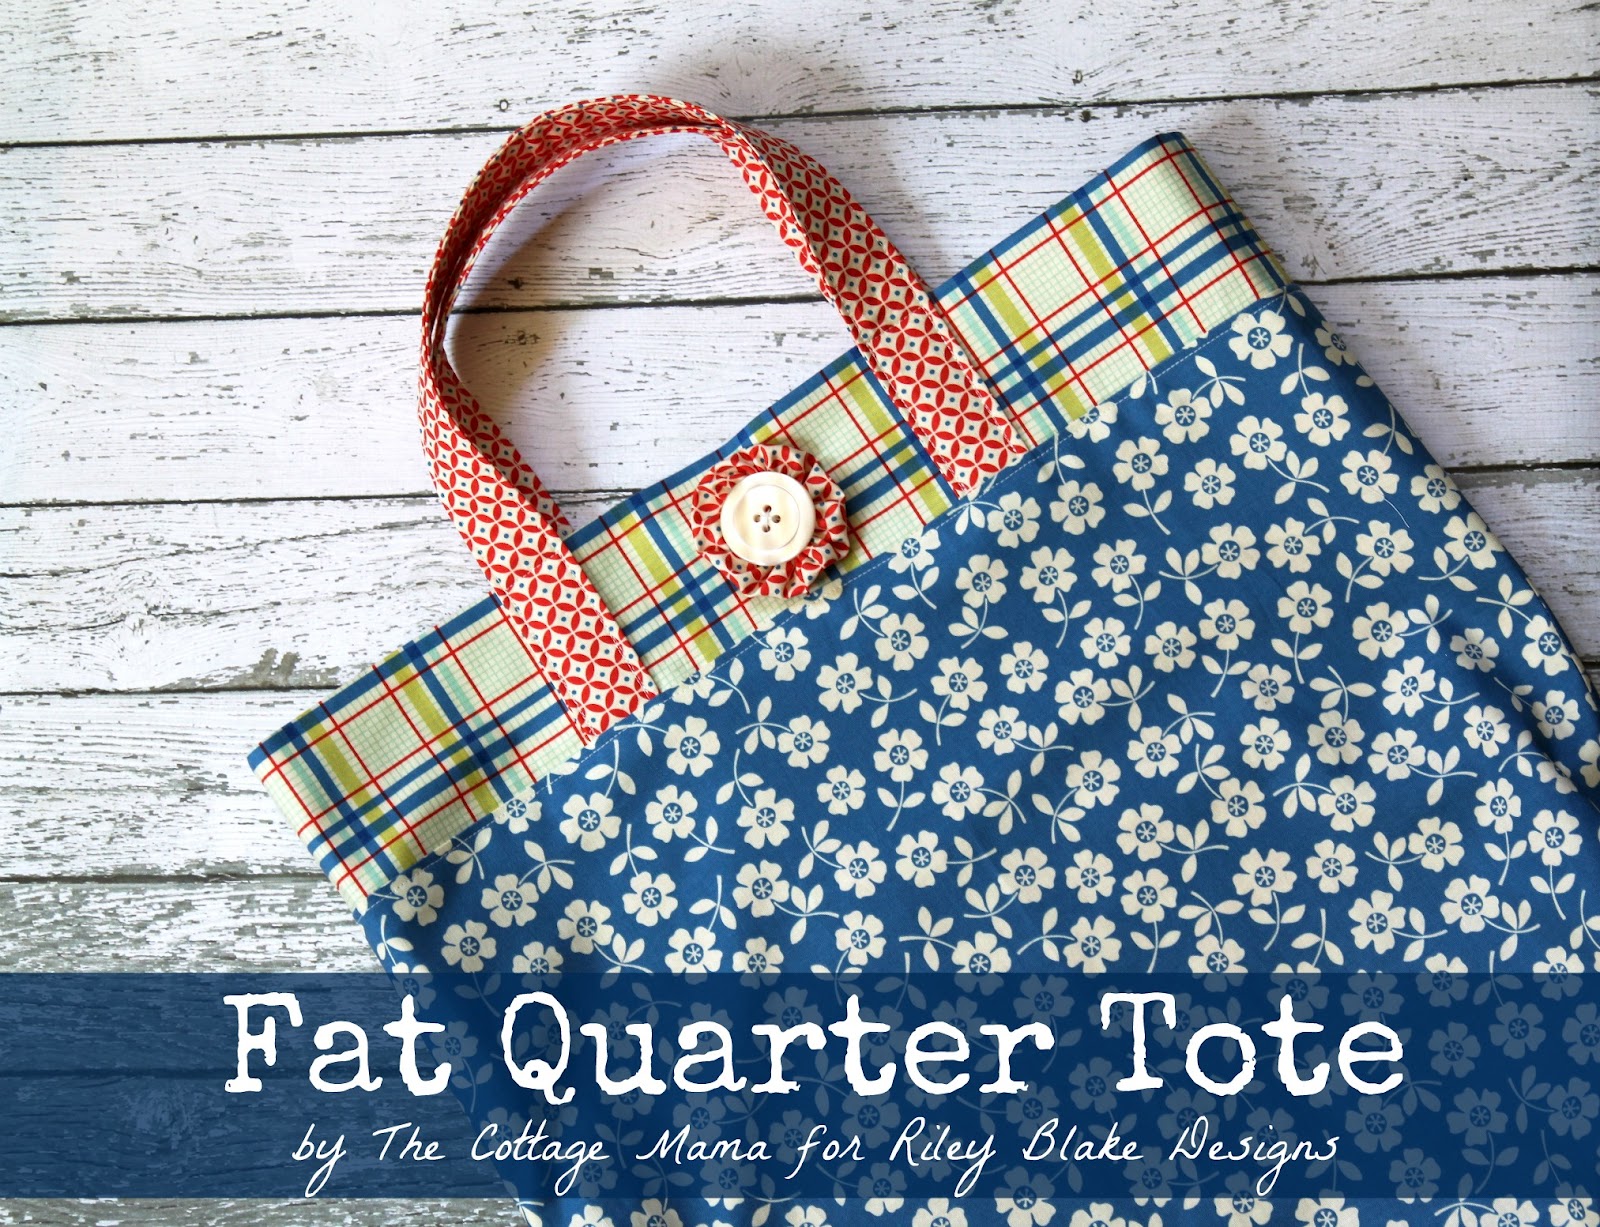 Tote to Go Bag Pattern